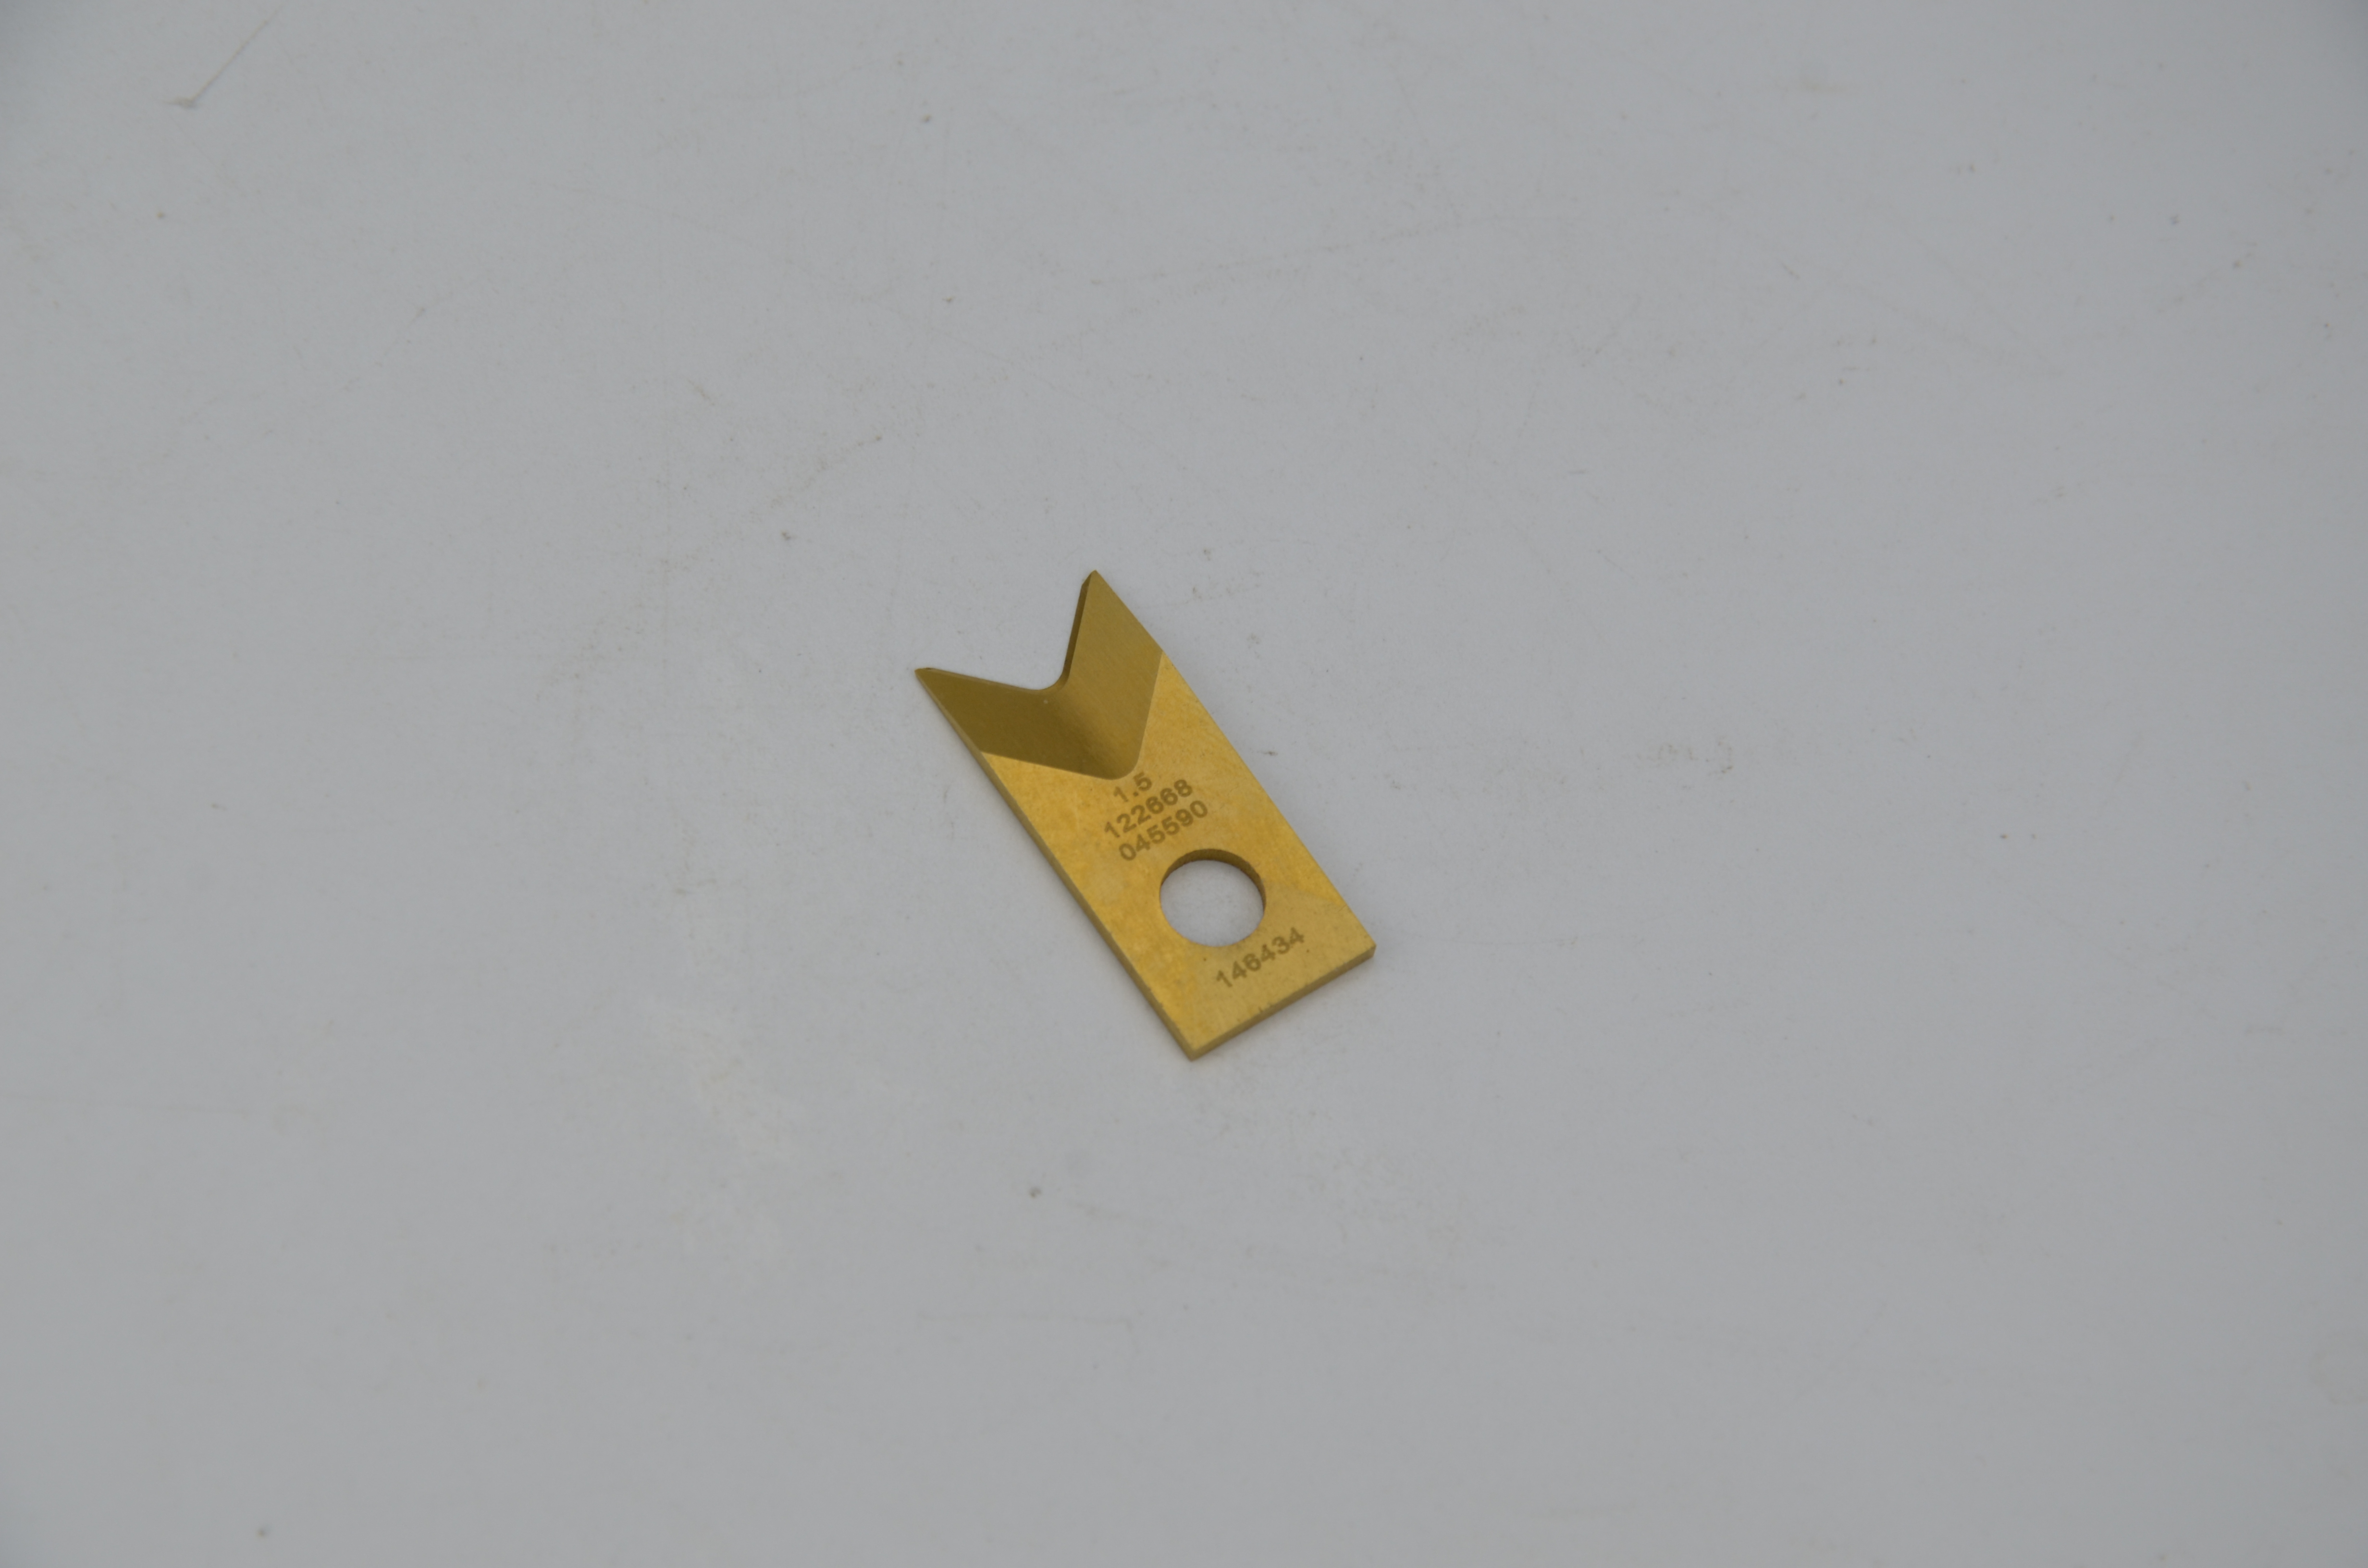 Metal Parts For Optical Instruments Factories –  CNC non-standard custom CNC lathe turning and milling parts custom precision mechanical hardware parts processing – SENDY